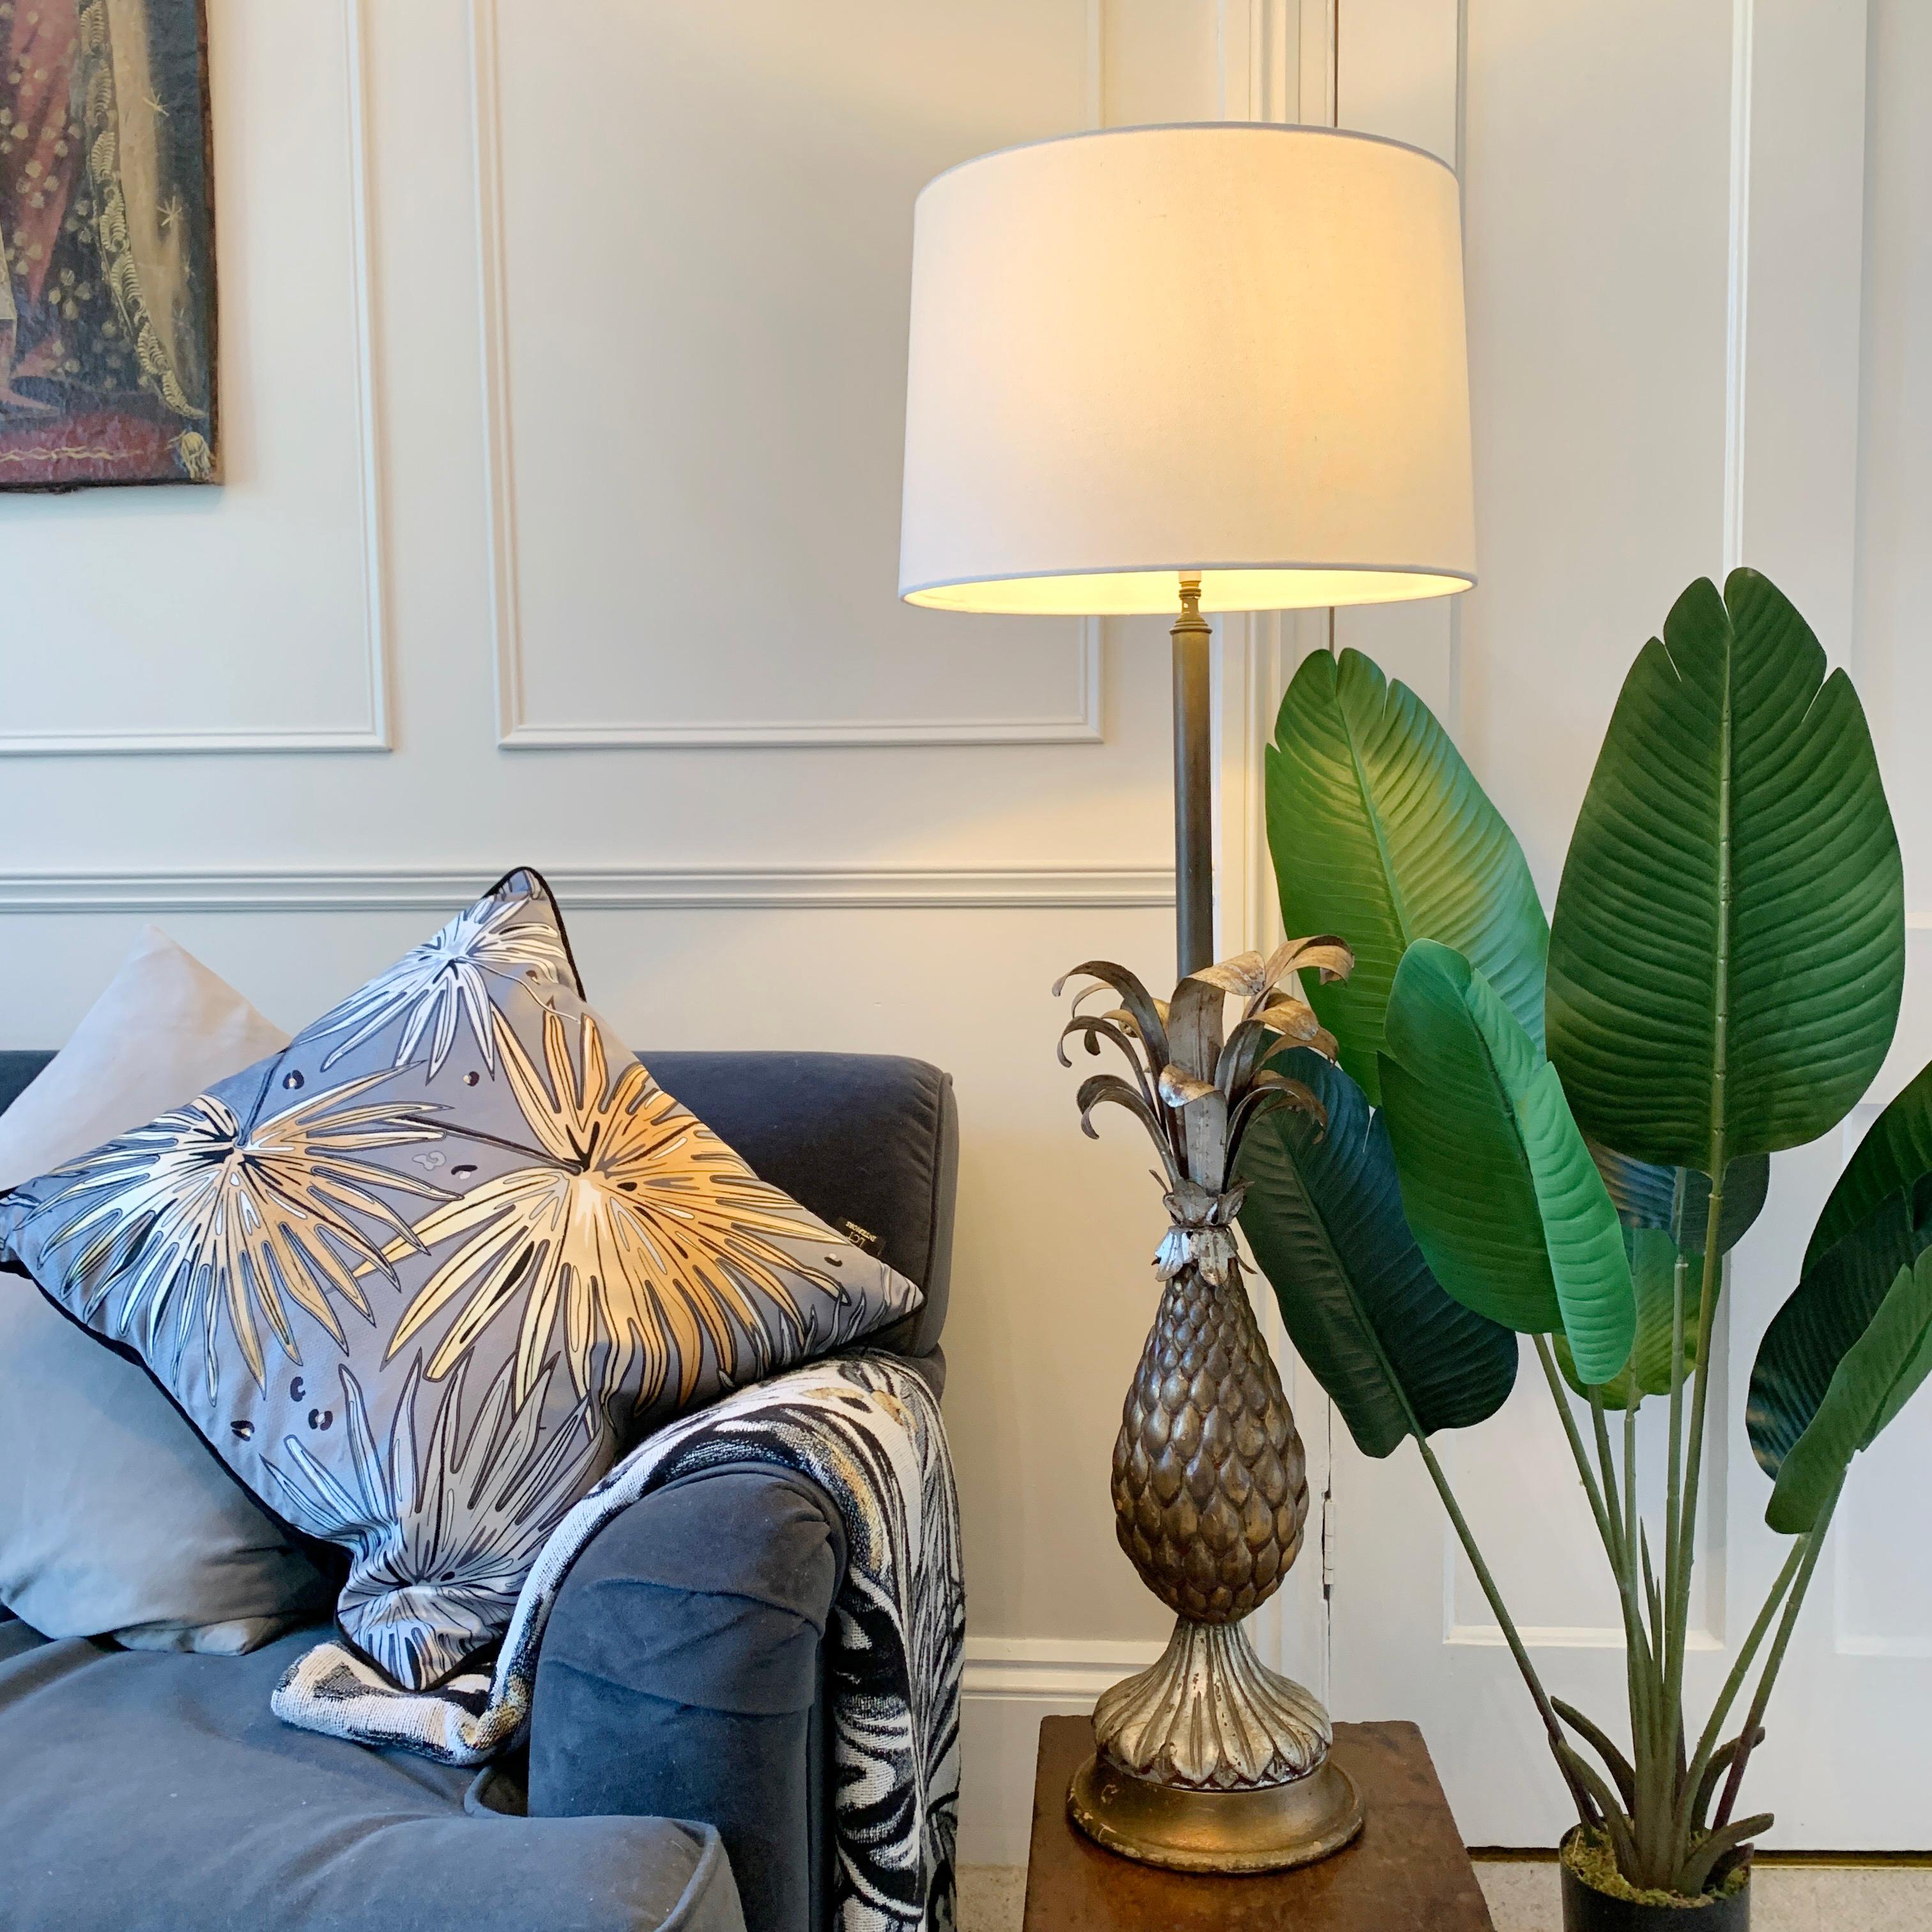 Impressive Mid Century Toleware Pineapple Lamp, This is a large statement table lamp of grand proportions. 
The base and pineapple body are carved in wood, with fabulous metal toleware fronds at the top. 
The lamp has a single bulb holder with